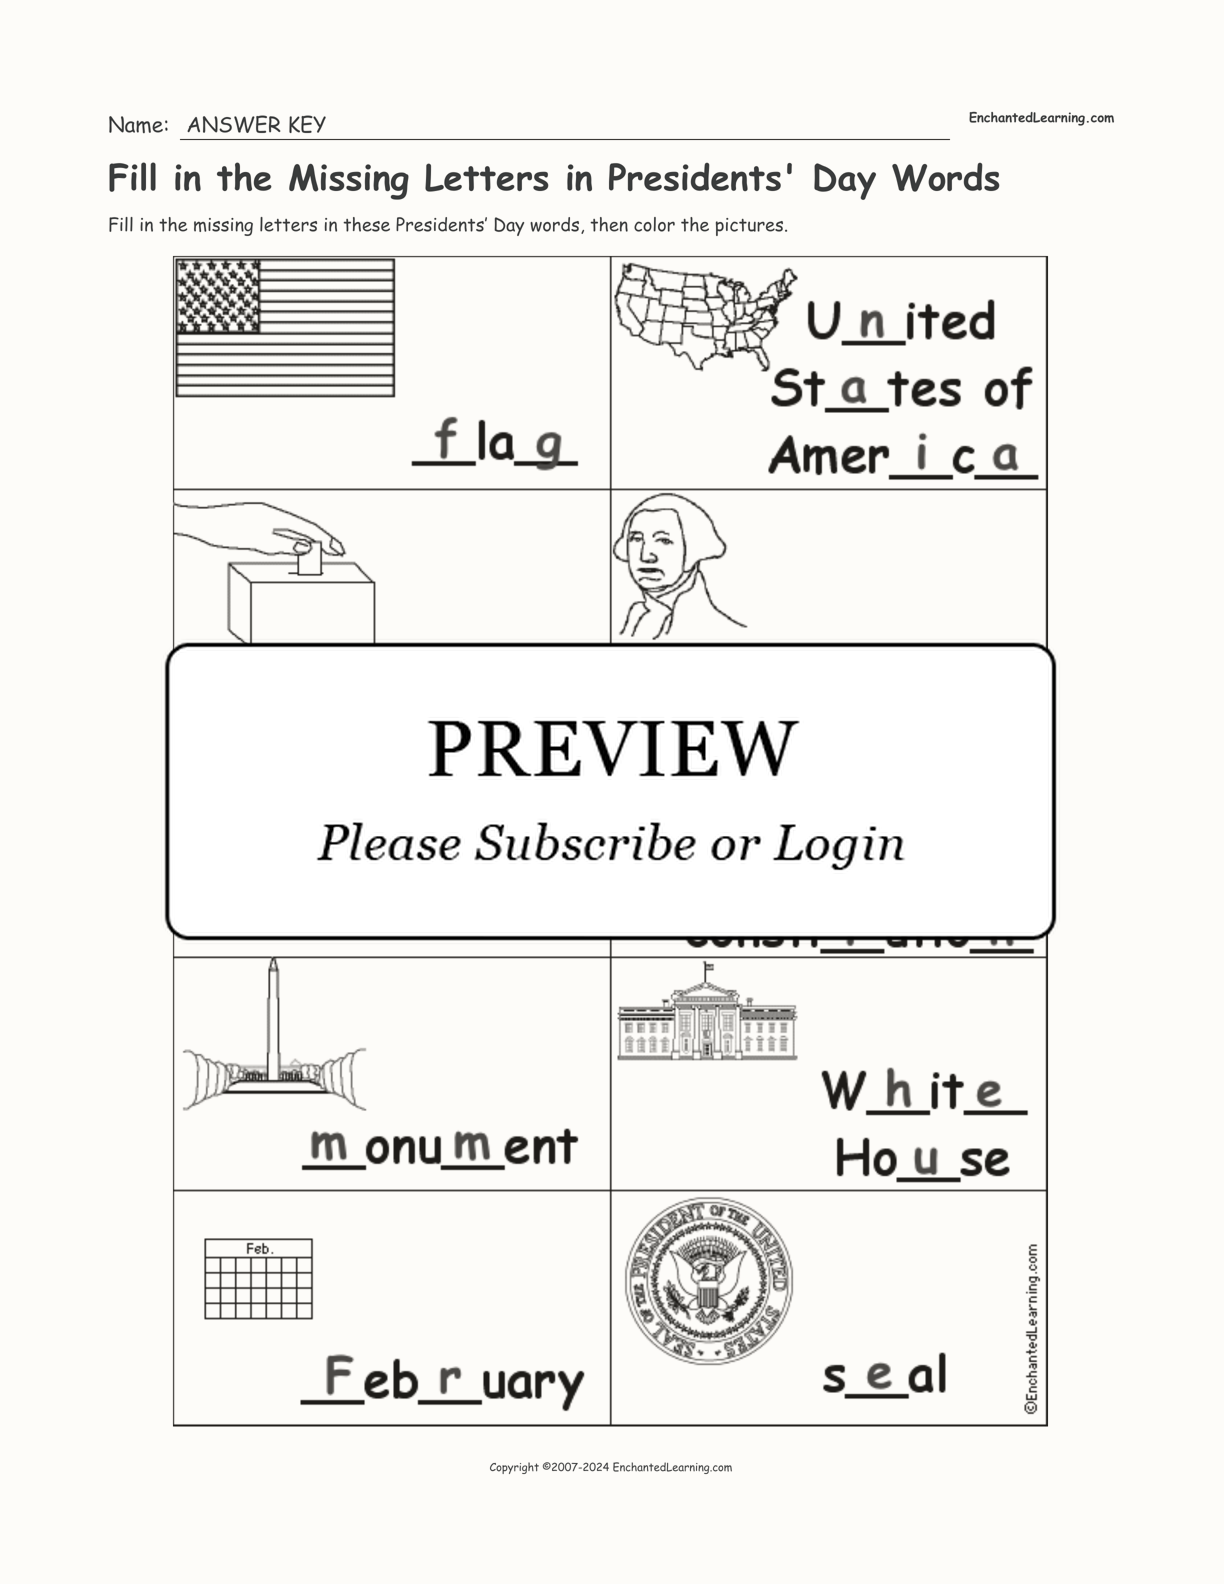 Fill in the Missing Letters in Presidents' Day Words interactive worksheet page 2